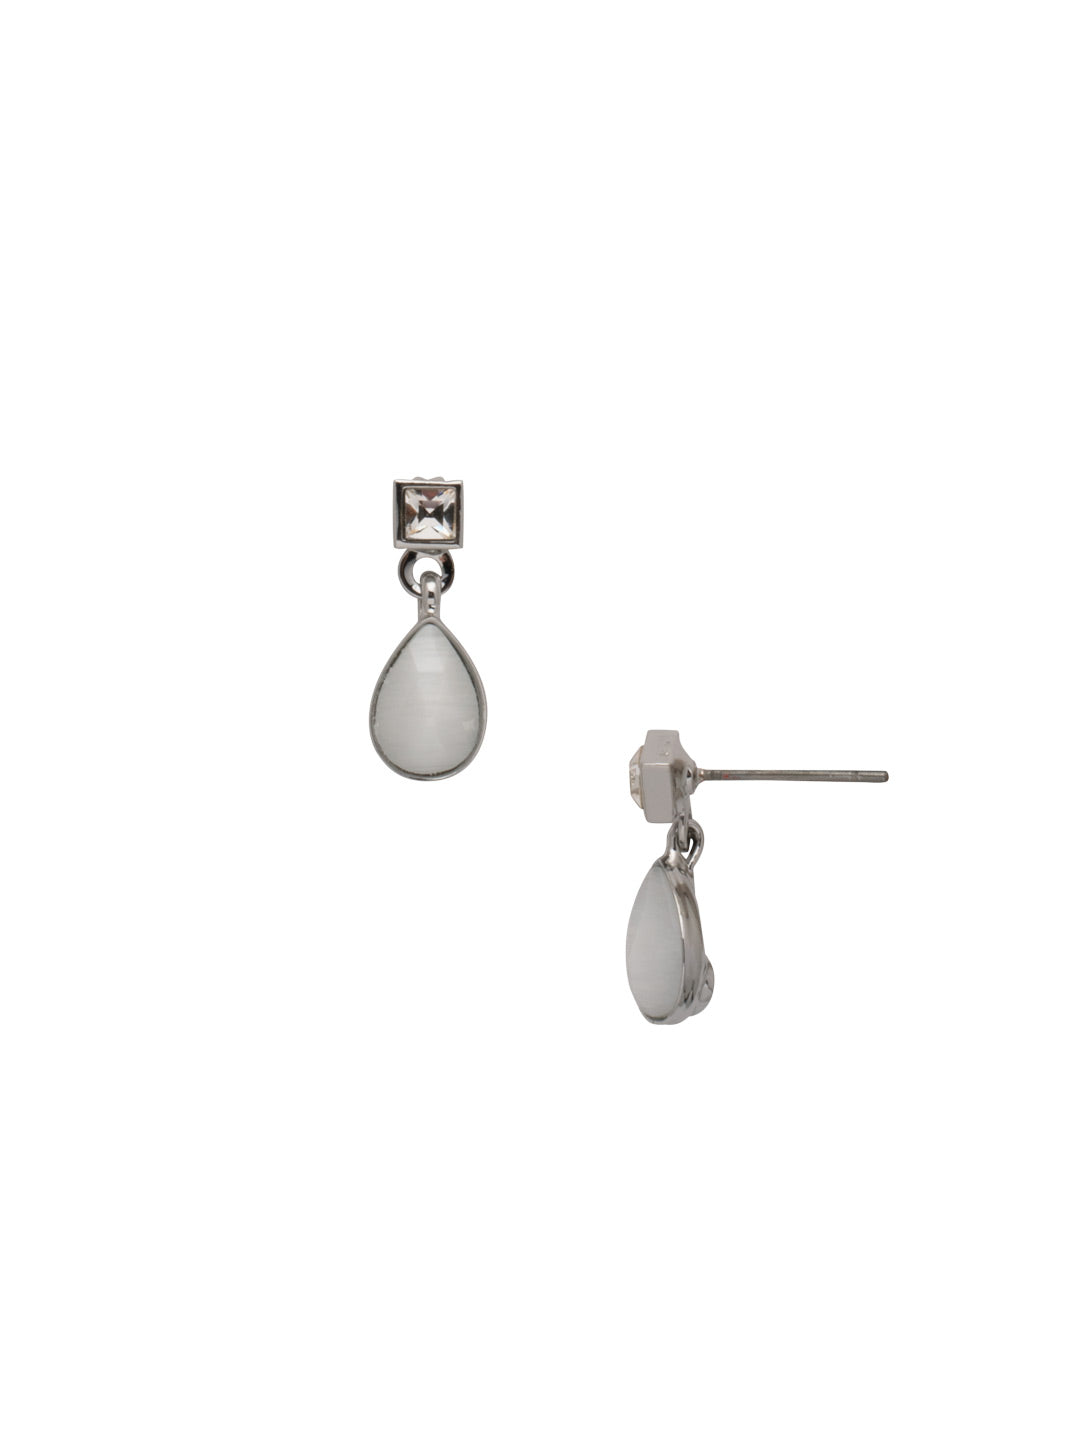 Elaina Petite Dangle Earring - EFC72PDSNB - <p>The Elaina Petite Dangle Earrings feature a small square cut crystal on a post, with a large pear cut semi-precious stone dangling below. From Sorrelli's Snow Bunny collection in our Palladium finish.</p>